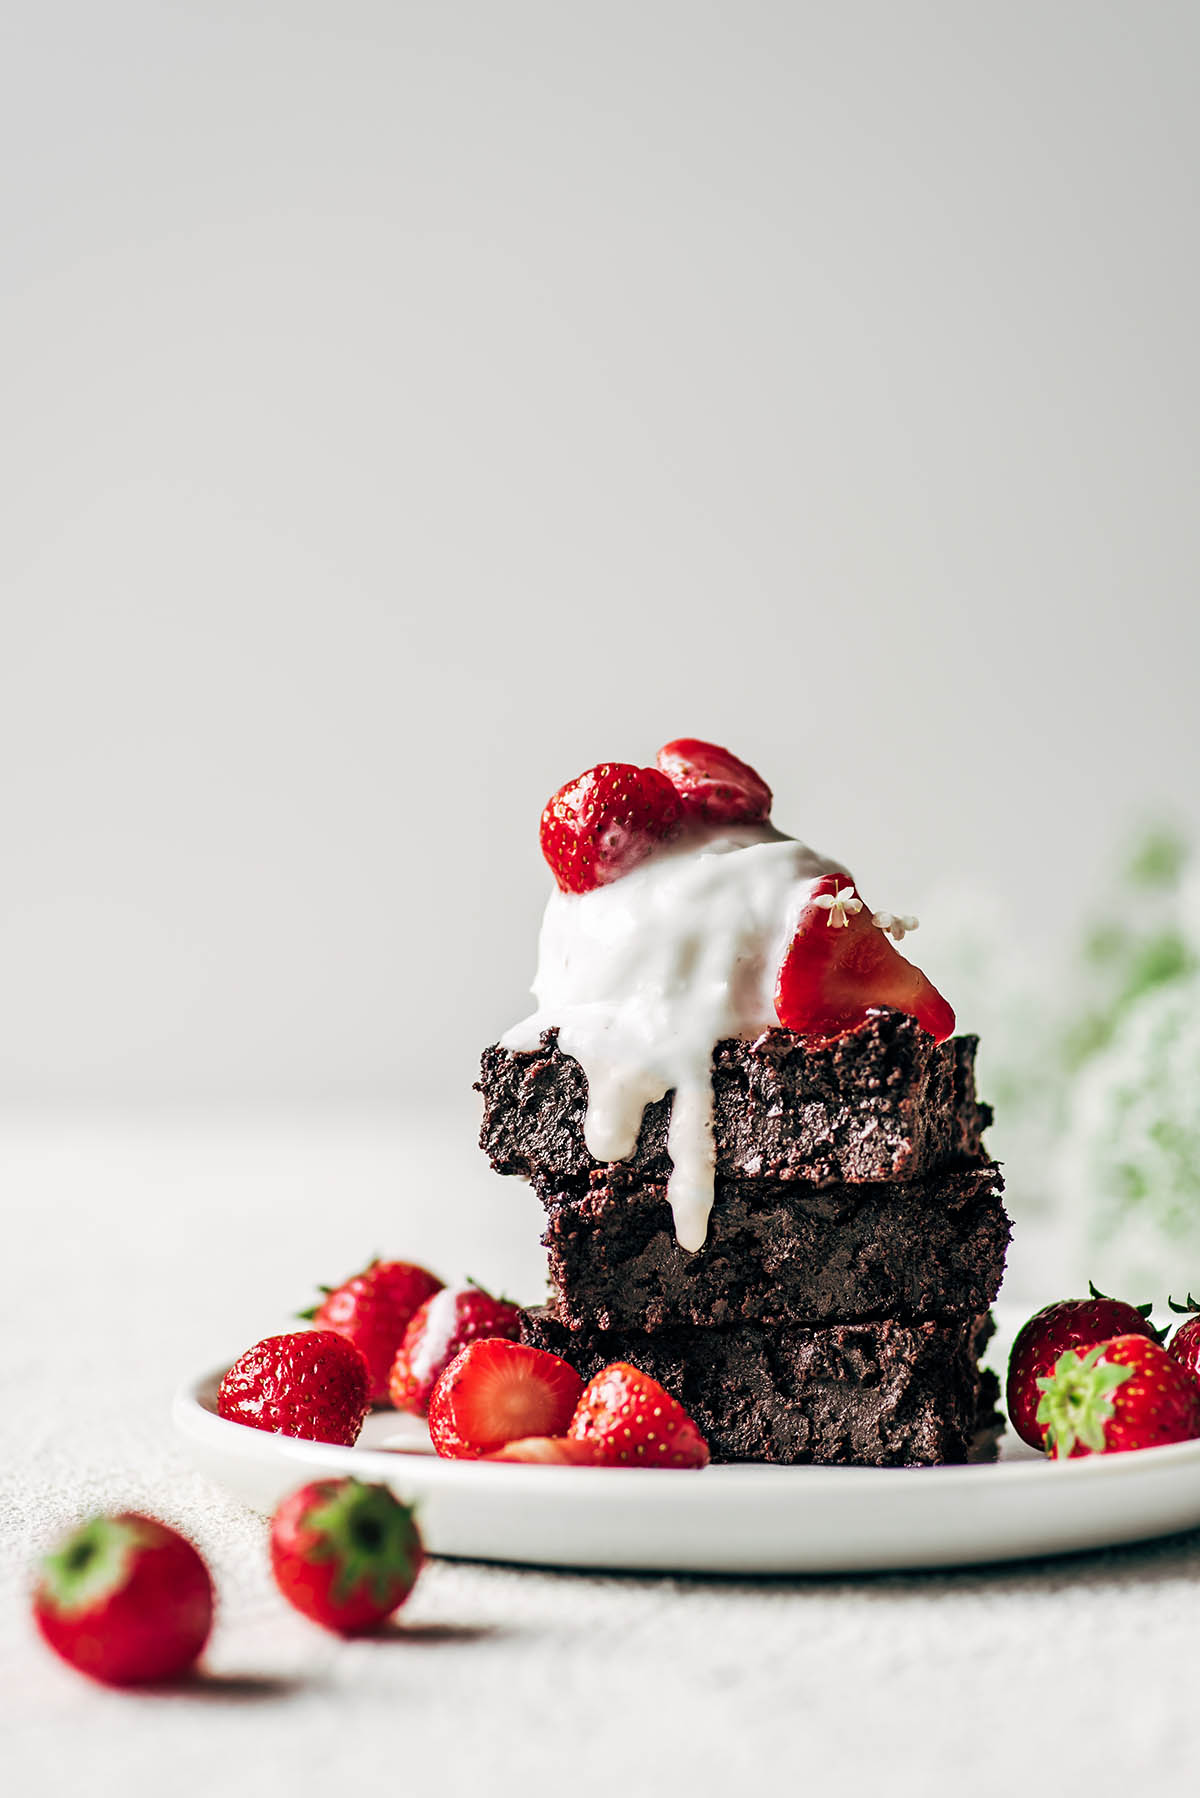 Three brownies stacked on a plate with ice cream and strawberries.